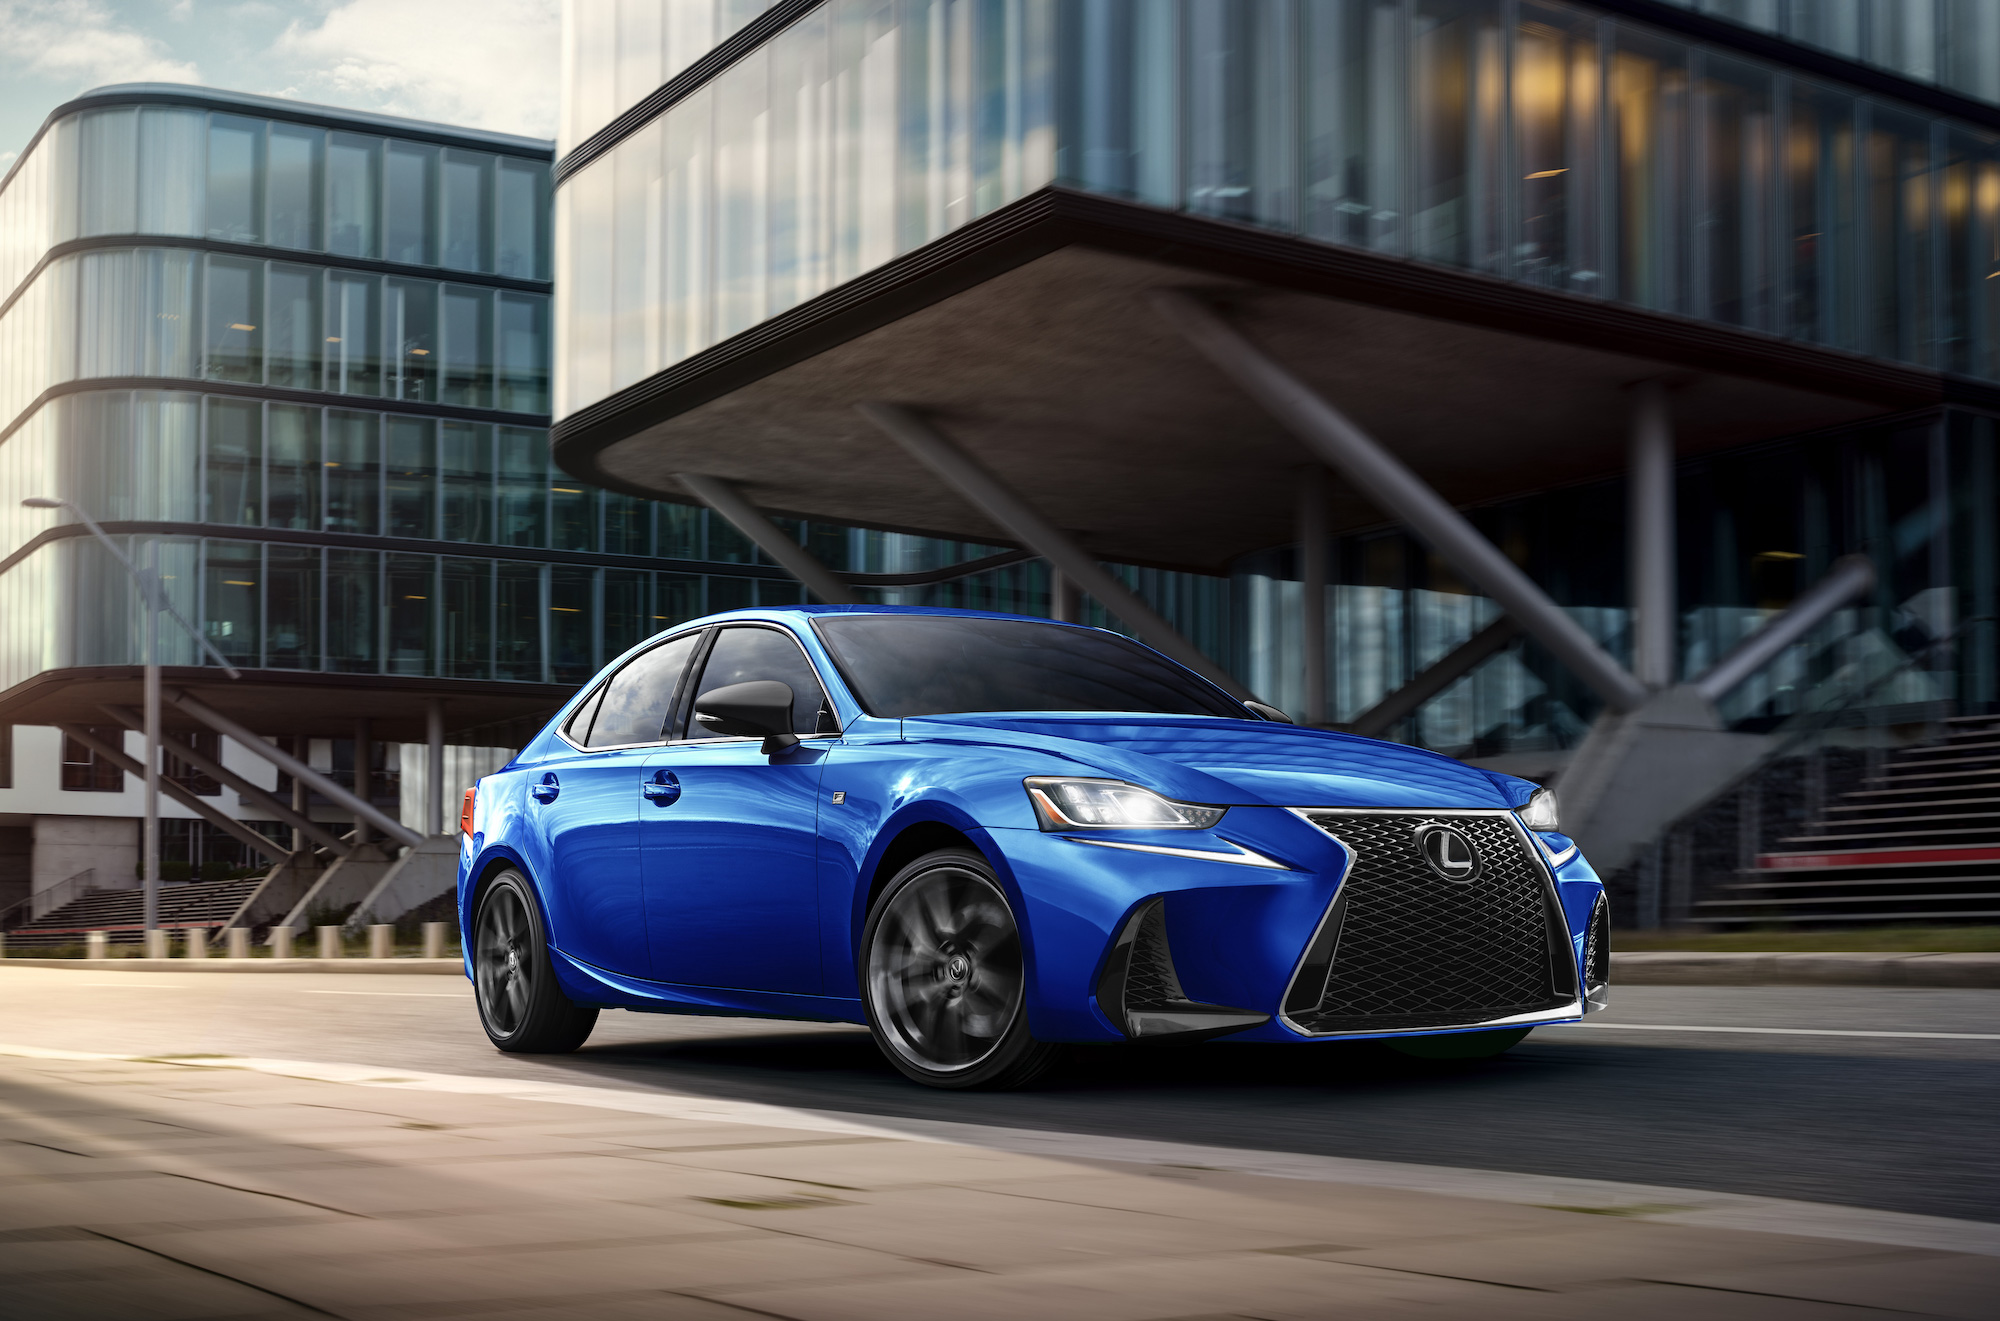 A blue 2020 Lexus IS sedan sits in front of two gray buildings.